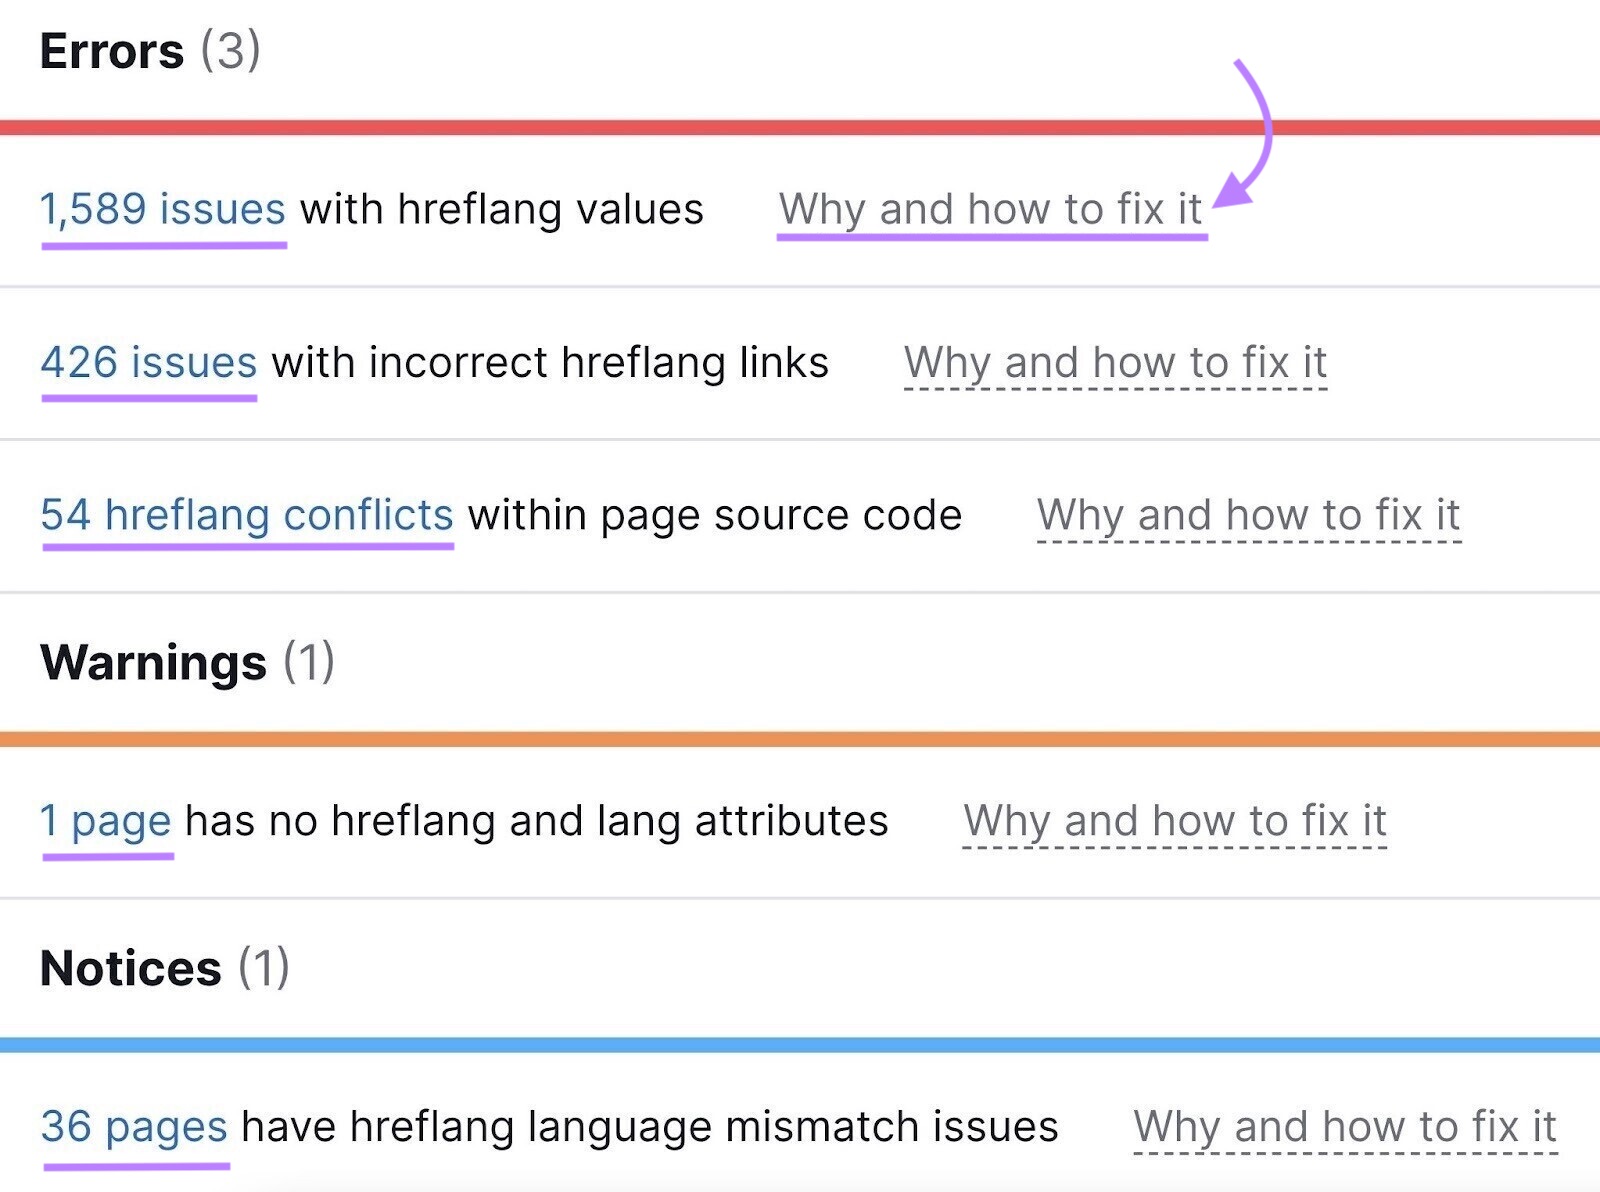 “1,589 issues with hreflang values" error highlighted under a list of hreflang issues in Site Audit